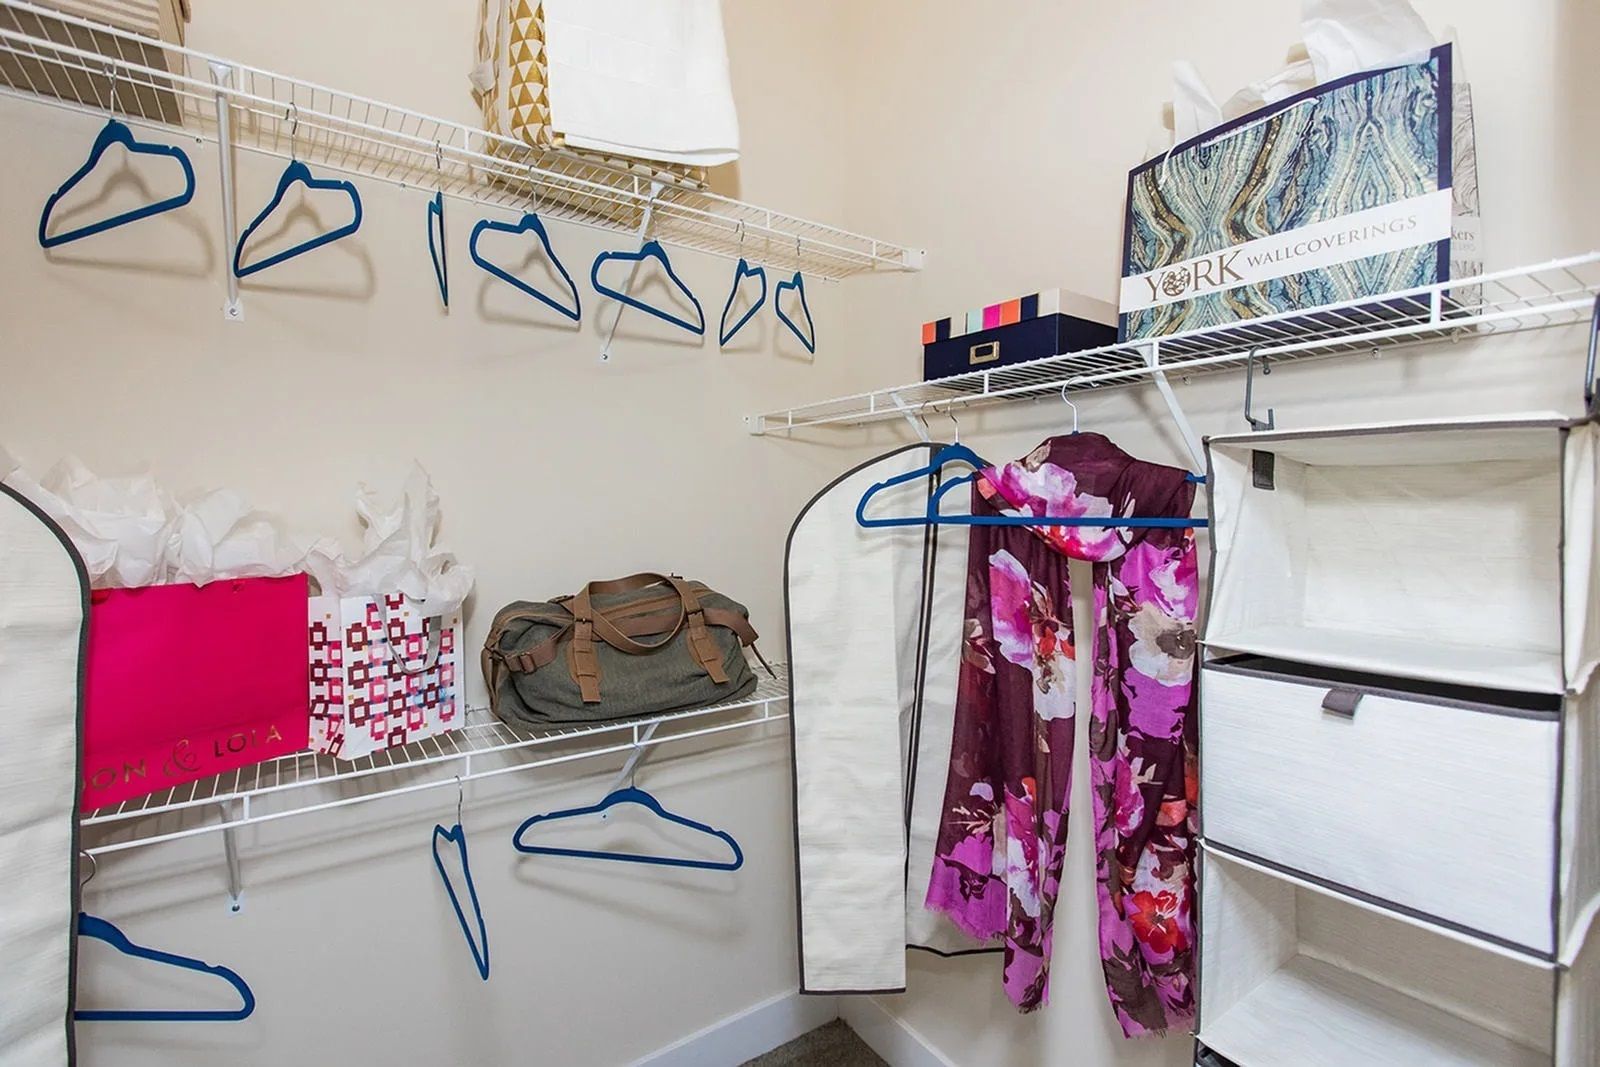 Walk-in closet at The Southerly.